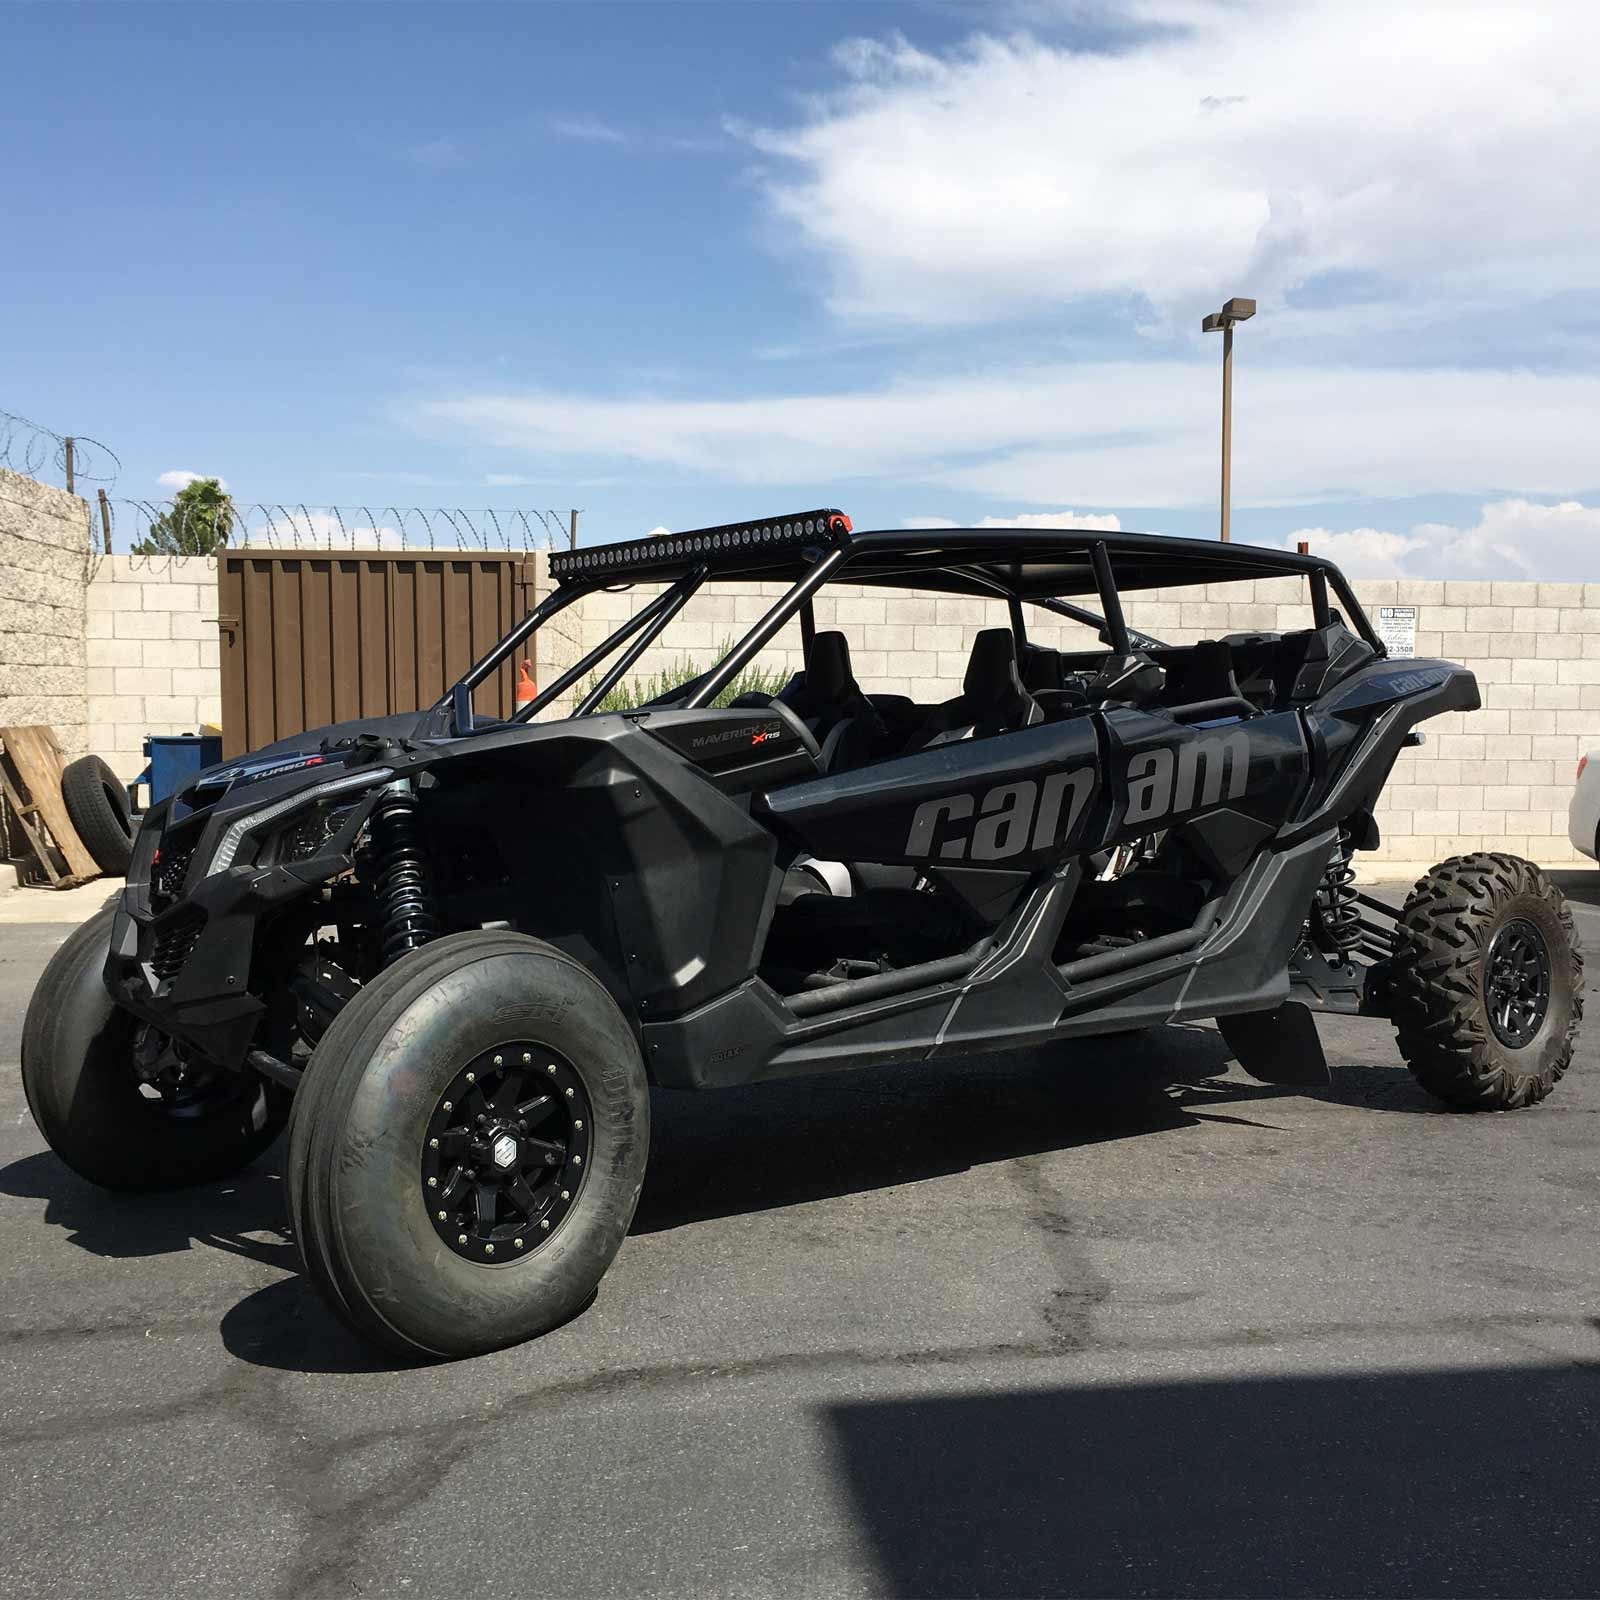 Can-am X3 Roll Cage Xrs 4 seater Pro Race Cage What Size Trailer For Can-am X3 4 Seater